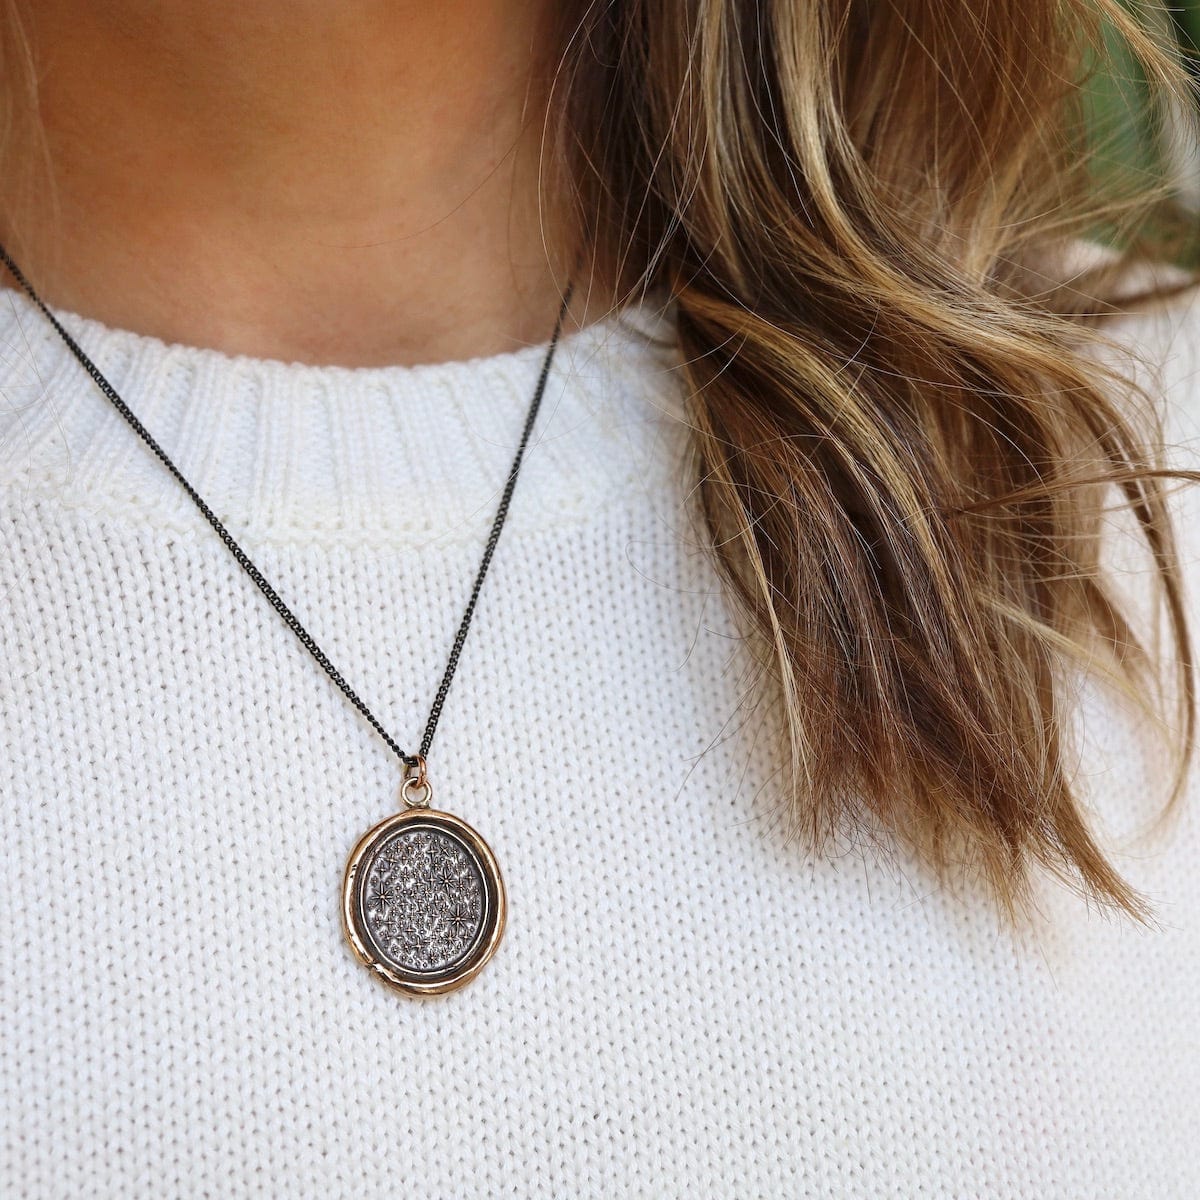 NKL Bronze We Are Stardust Talisman Necklace